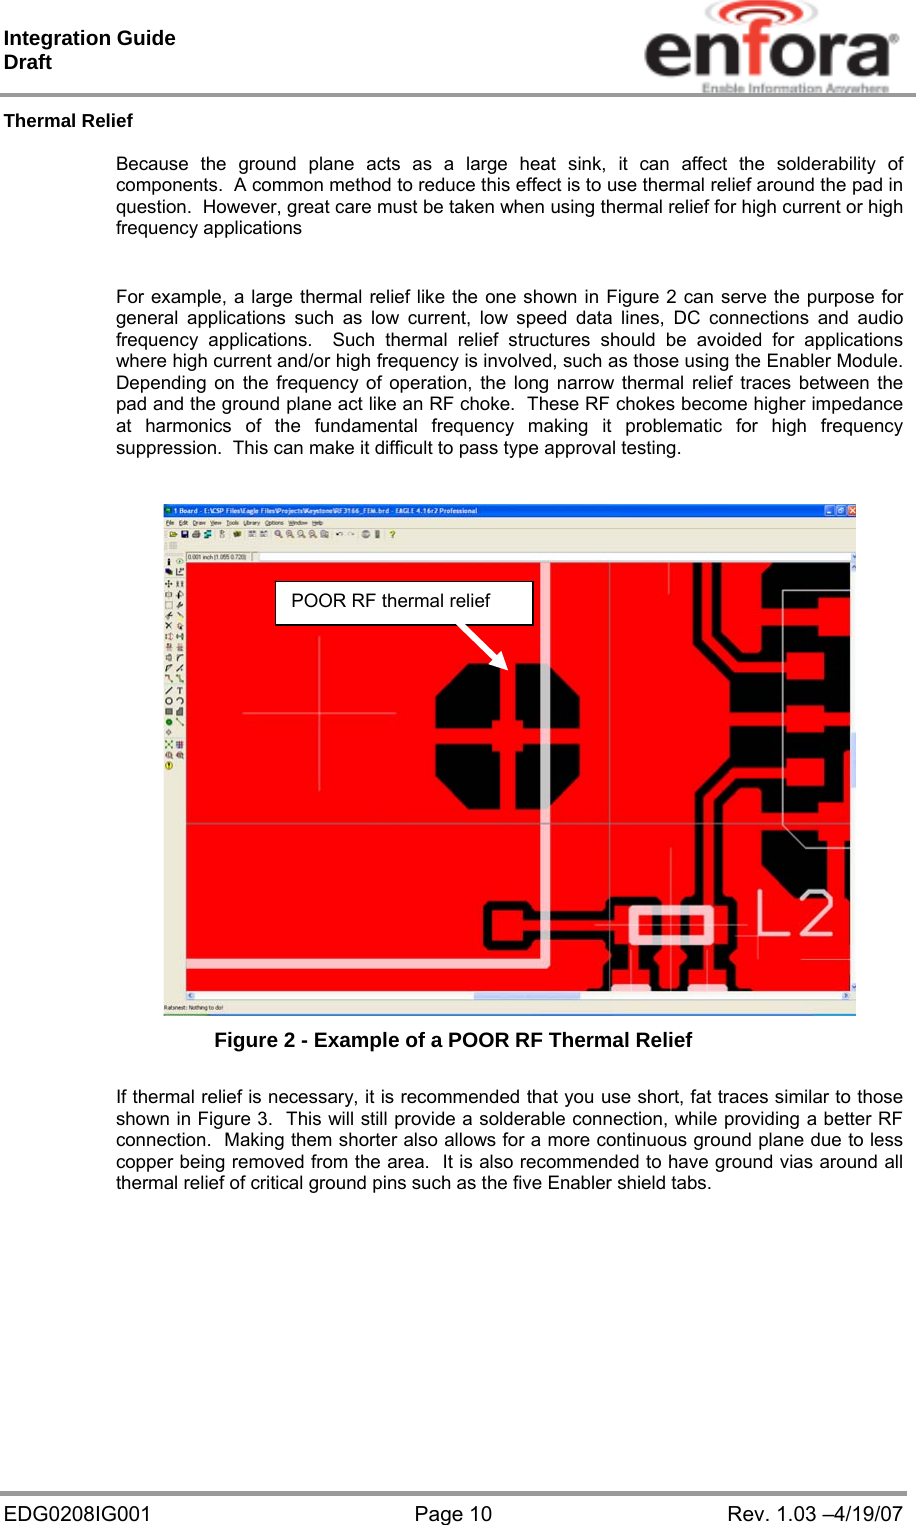 Integration Guide  Draft EDG0208IG001  Page 10  Rev. 1.03 –4/19/07 Thermal Relief  Because the ground plane acts as a large heat sink, it can affect the solderability of components.  A common method to reduce this effect is to use thermal relief around the pad in question.  However, great care must be taken when using thermal relief for high current or high frequency applications  For example, a large thermal relief like the one shown in Figure 2 can serve the purpose for general applications such as low current, low speed data lines, DC connections and audio frequency applications.  Such thermal relief structures should be avoided for applications where high current and/or high frequency is involved, such as those using the Enabler Module.  Depending on the frequency of operation, the long narrow thermal relief traces between the pad and the ground plane act like an RF choke.  These RF chokes become higher impedance at harmonics of the fundamental frequency making it problematic for high frequency suppression.  This can make it difficult to pass type approval testing.   Figure 2 - Example of a POOR RF Thermal Relief  If thermal relief is necessary, it is recommended that you use short, fat traces similar to those shown in Figure 3.  This will still provide a solderable connection, while providing a better RF connection.  Making them shorter also allows for a more continuous ground plane due to less copper being removed from the area.  It is also recommended to have ground vias around all thermal relief of critical ground pins such as the five Enabler shield tabs.   POOR RF thermal relief 